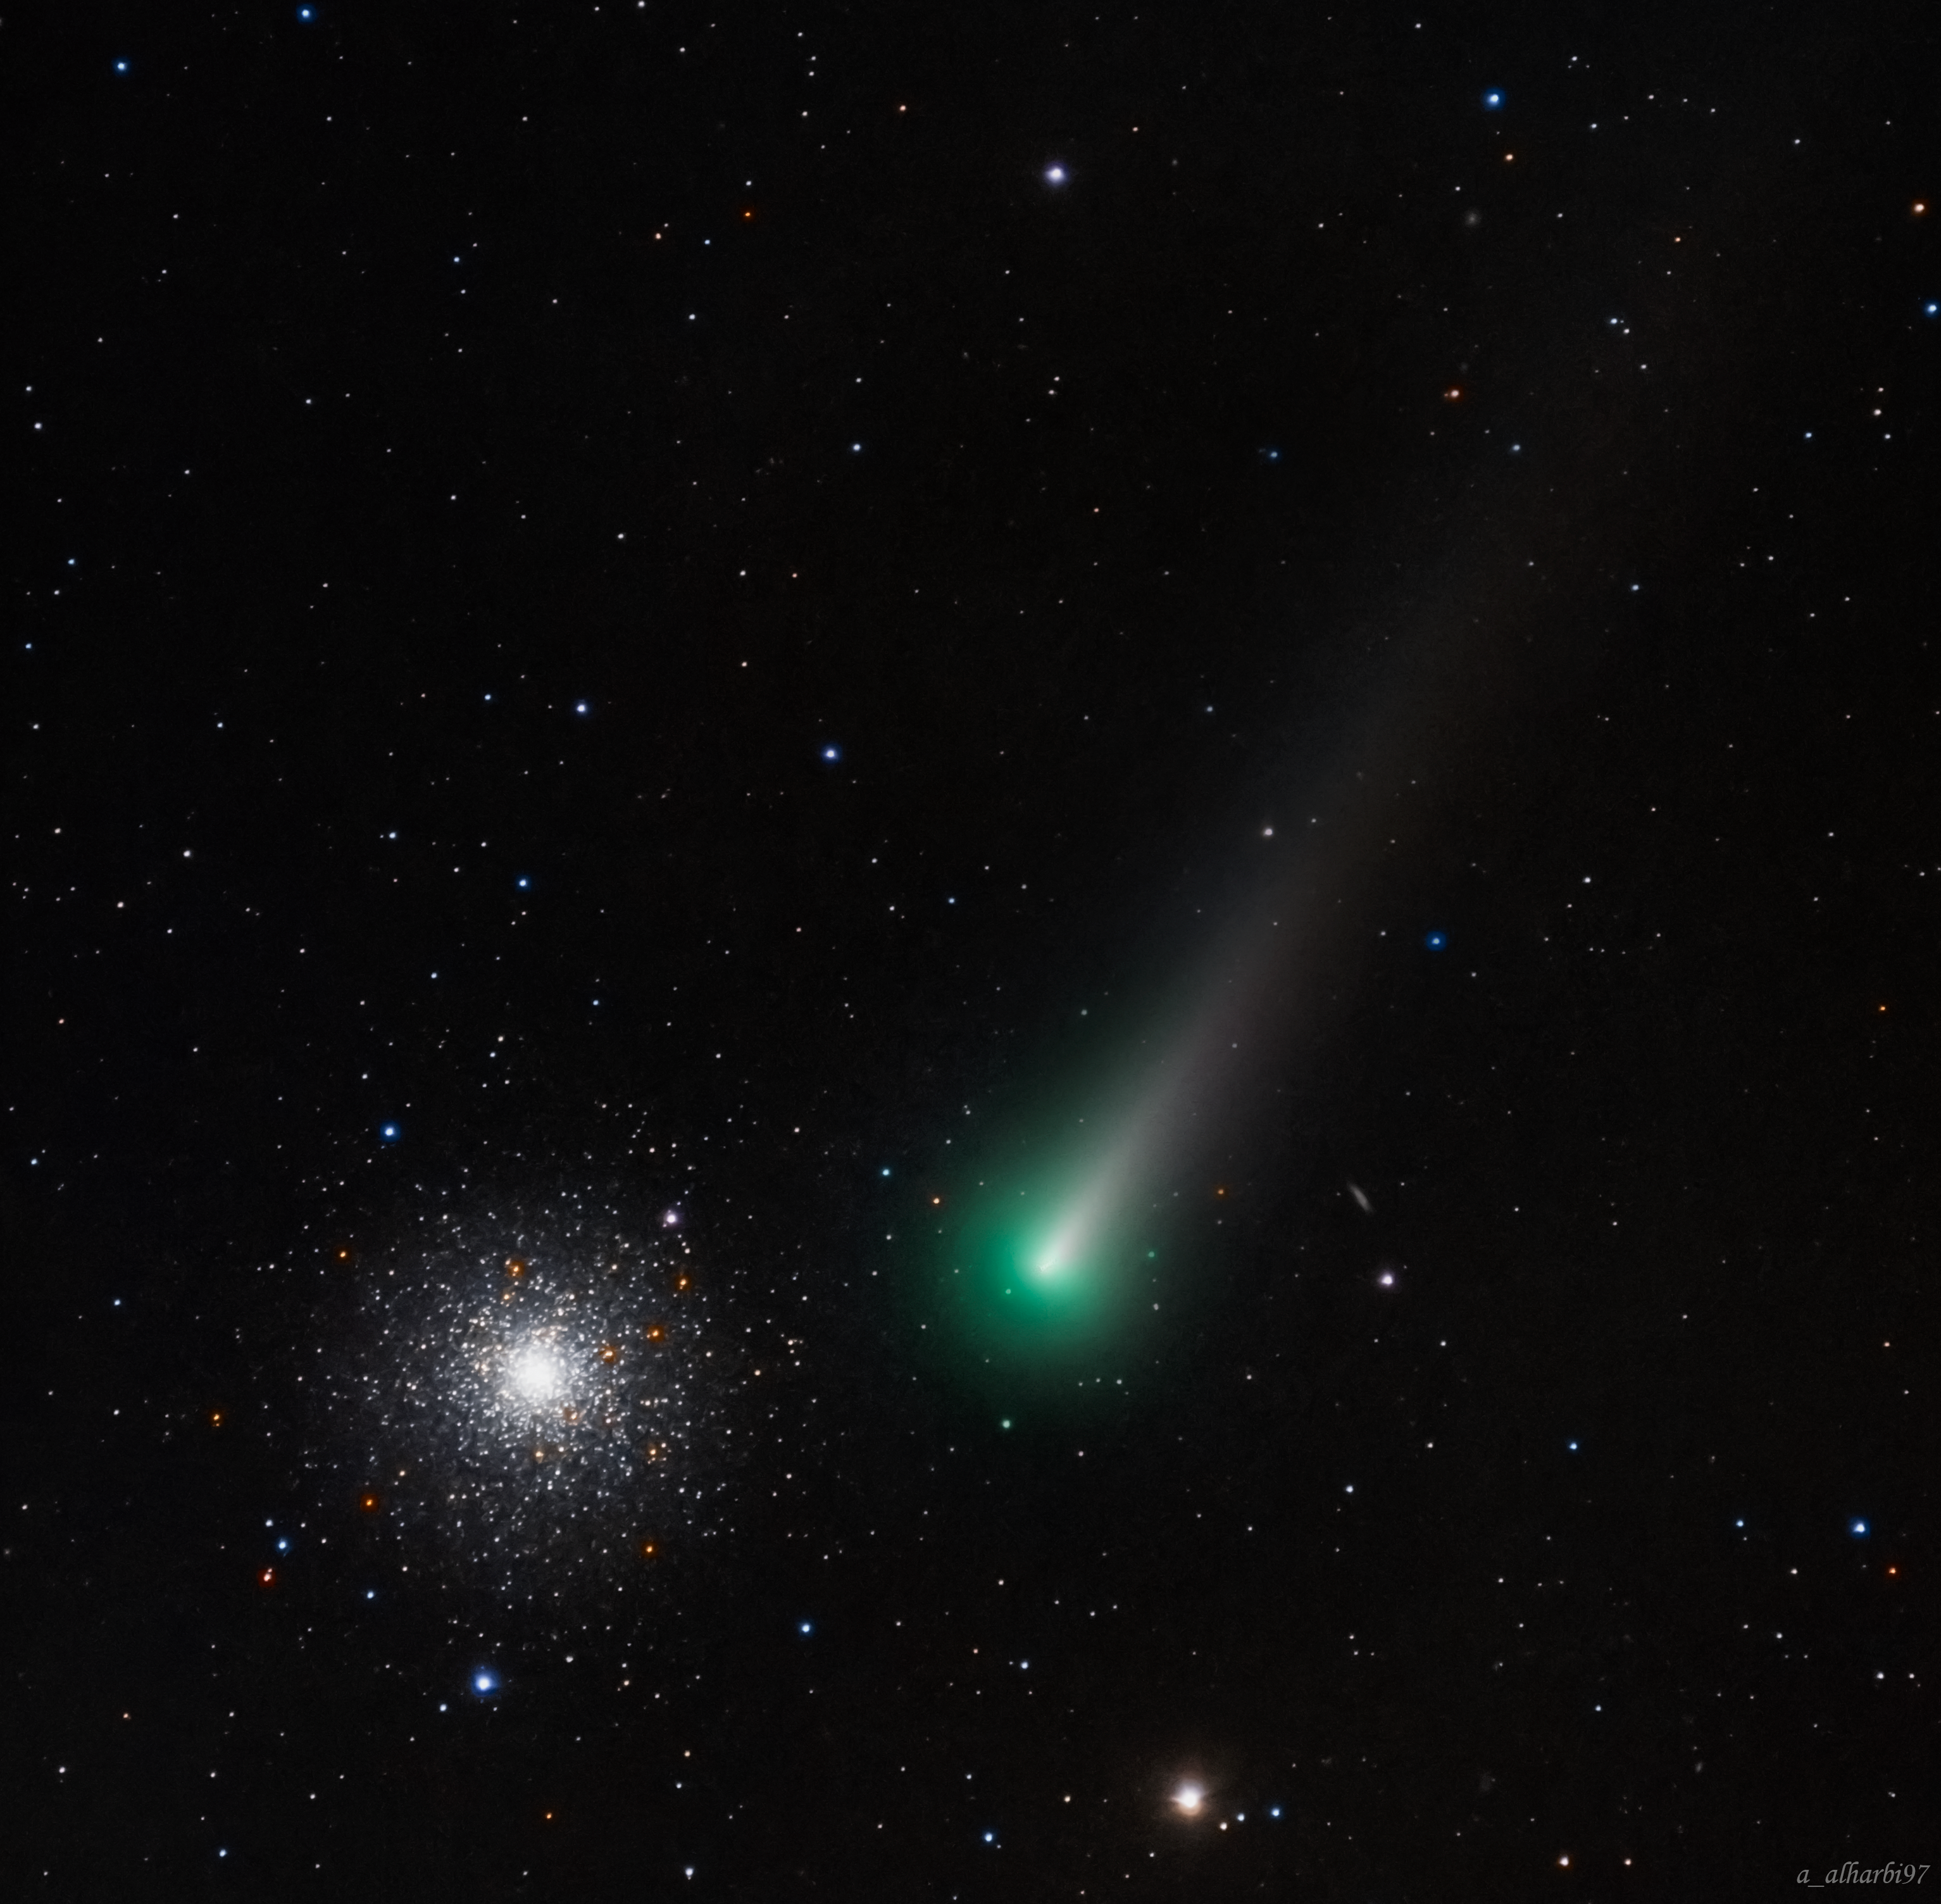 KUWAIT: This photo taken by Kuwaiti astrophotographer Abdullah Al-Harbi shows Comet Leonard falling beside the M3 cluster as seen from Kuwait's sky. The comet, which was discovered in 2021, is currently passing through Kuwait's sky, and is expected to be at its brightest point on December 12.n